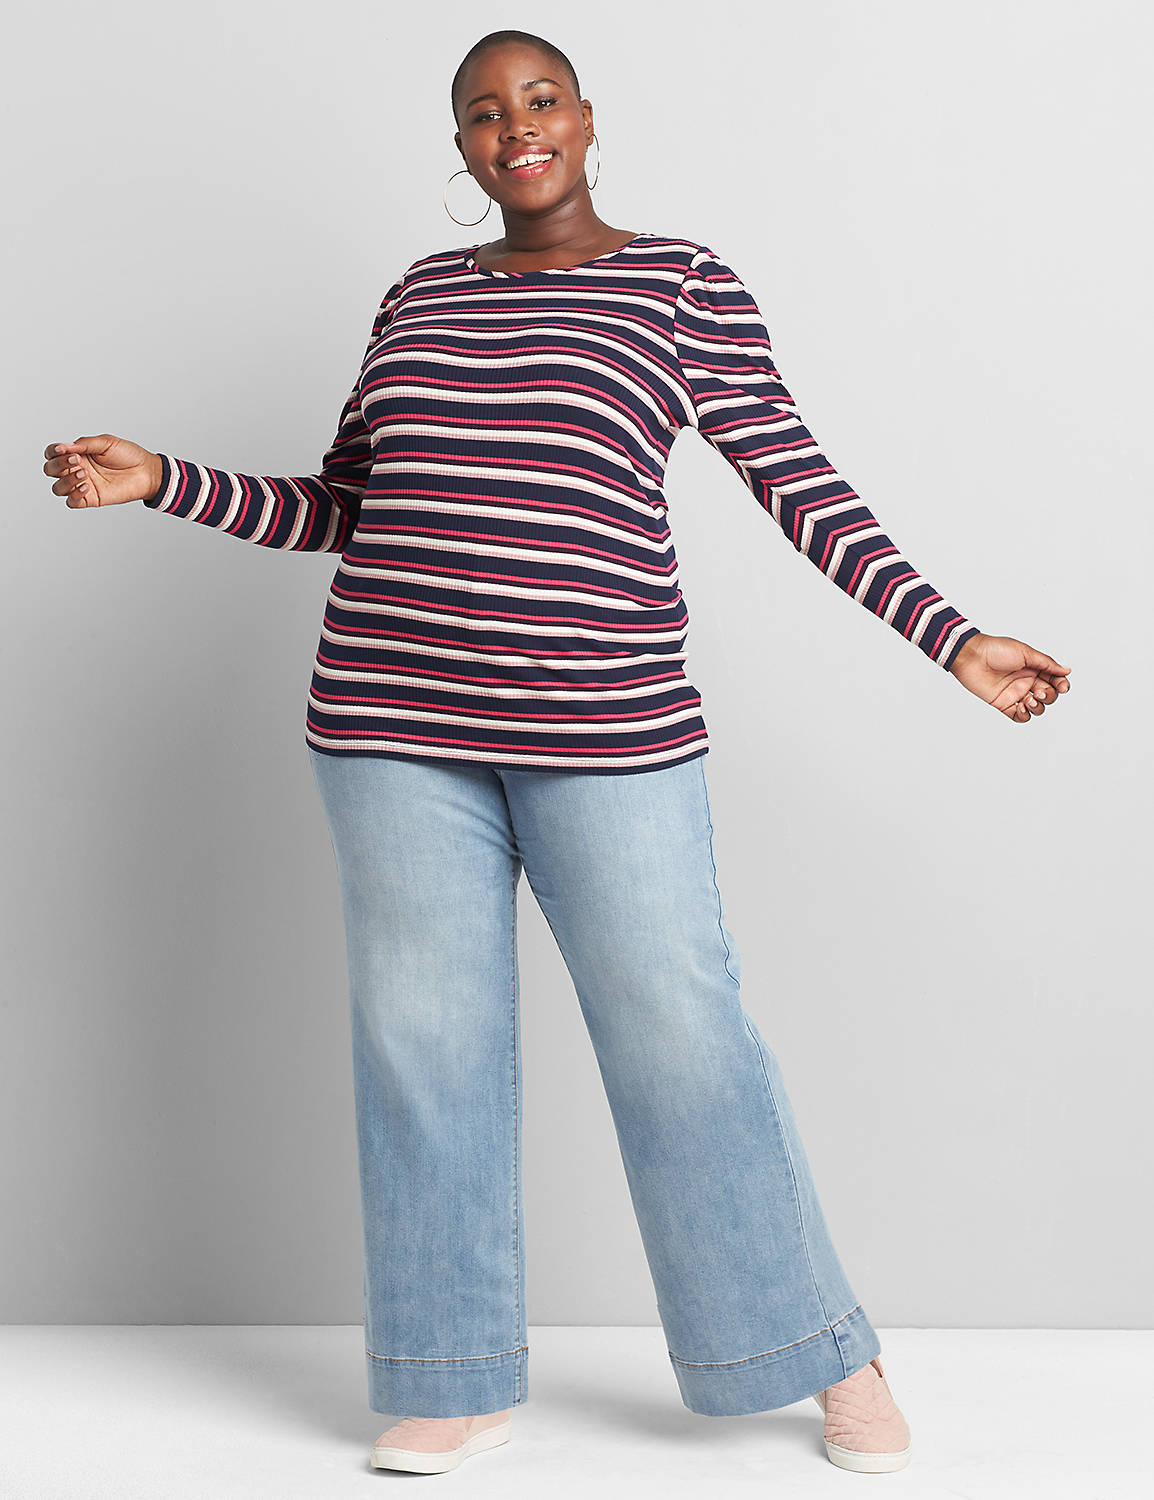 Long Sleeve Crew Neck Tee in Rib Fabric with Stripe 1119226:Stripe:22/24 Product Image 3